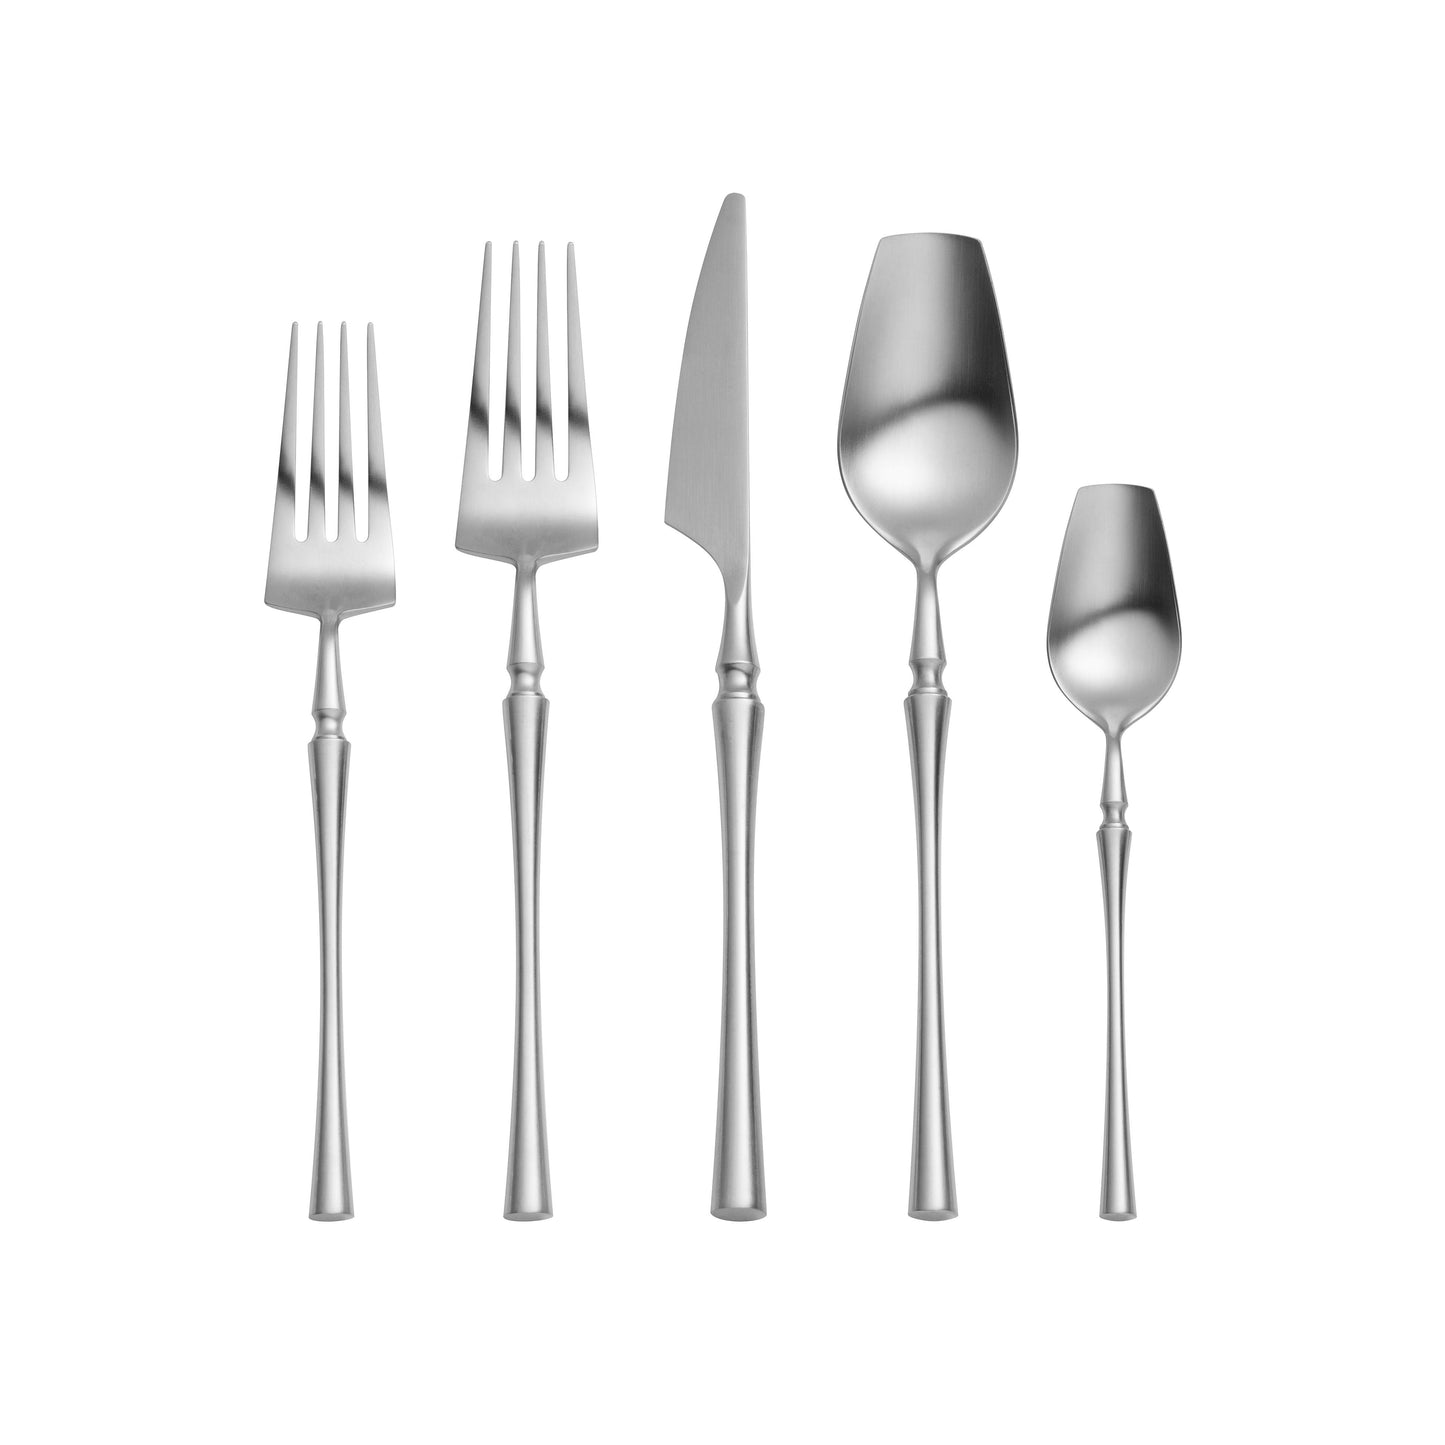 ladder brushed silver stainless steel flatware - set of 20 pieces